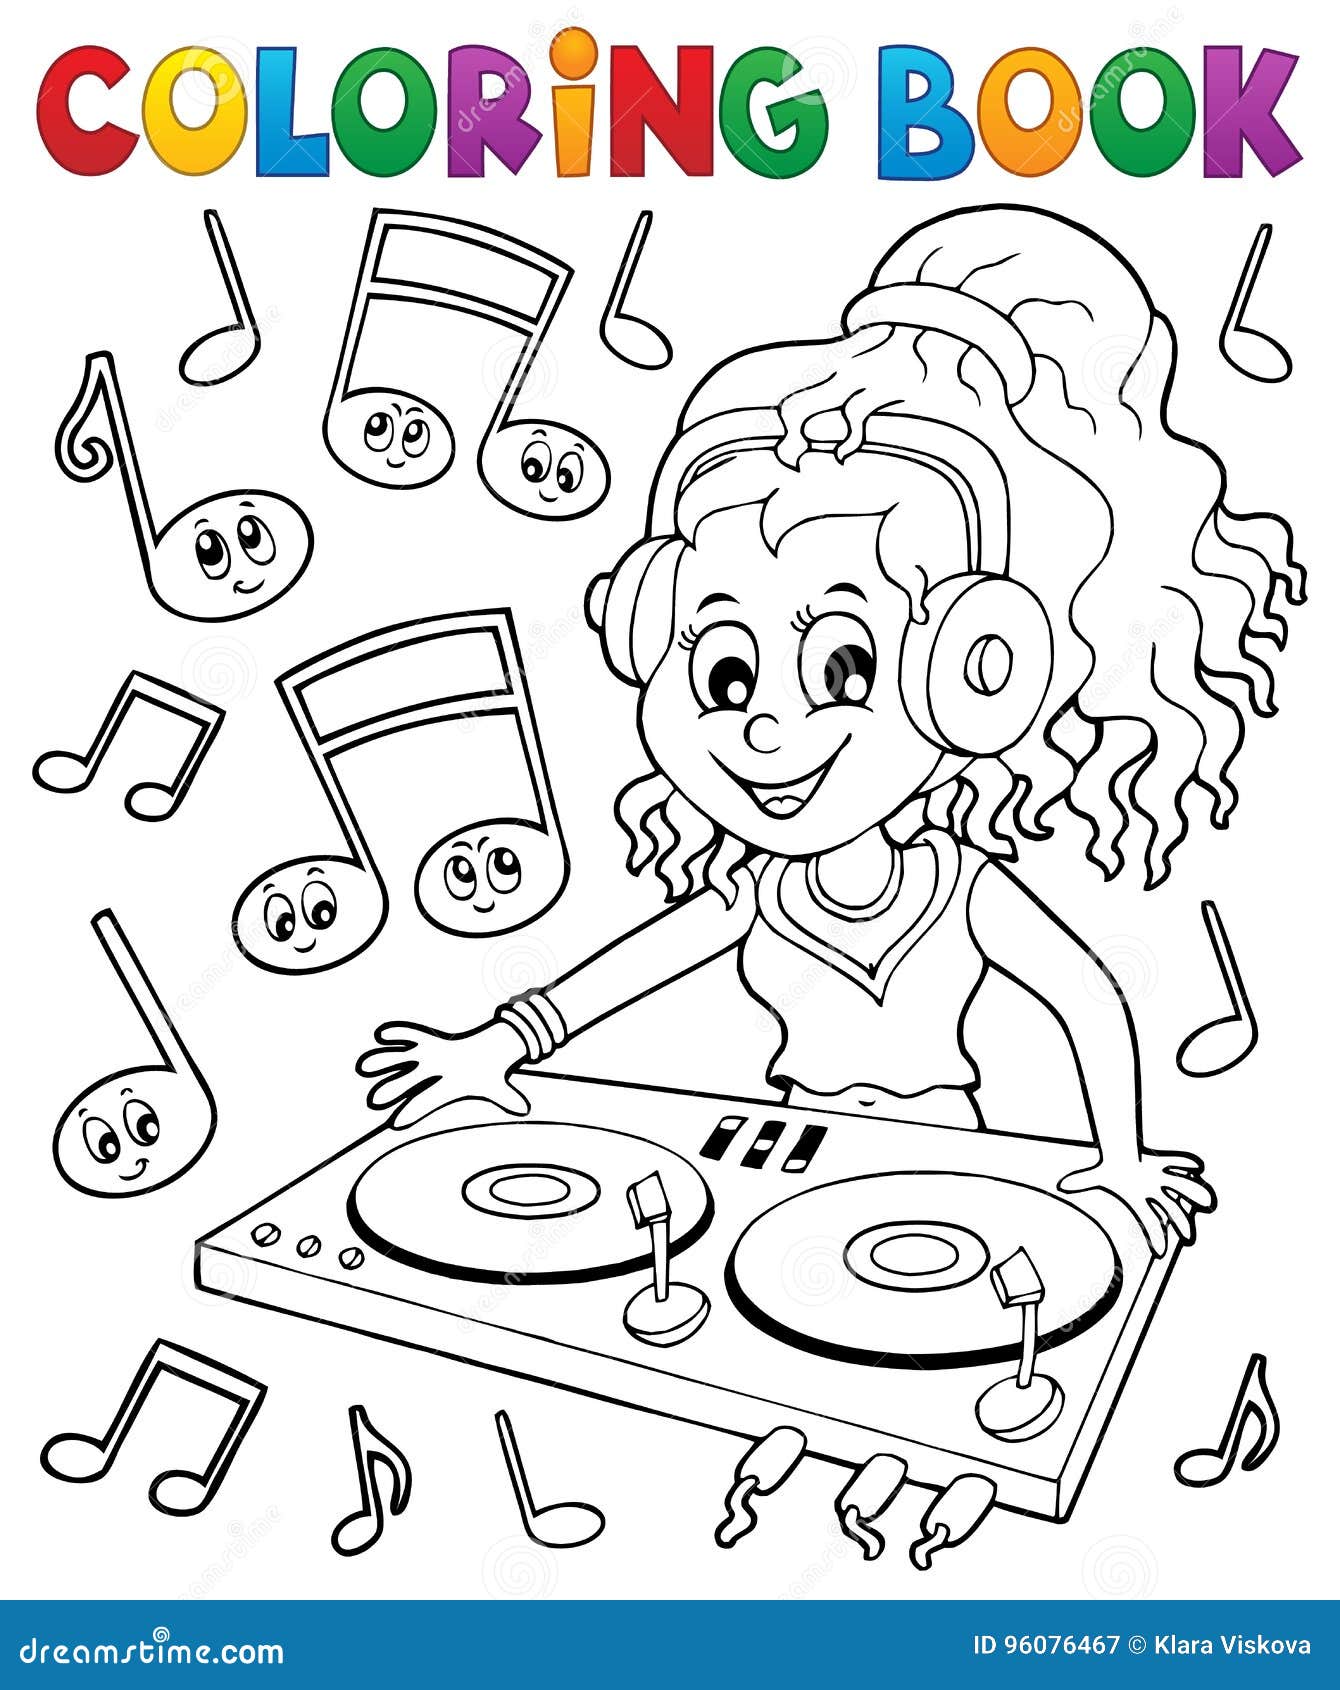 Coloring book DJ girl stock vector. Illustration of music - 96076467